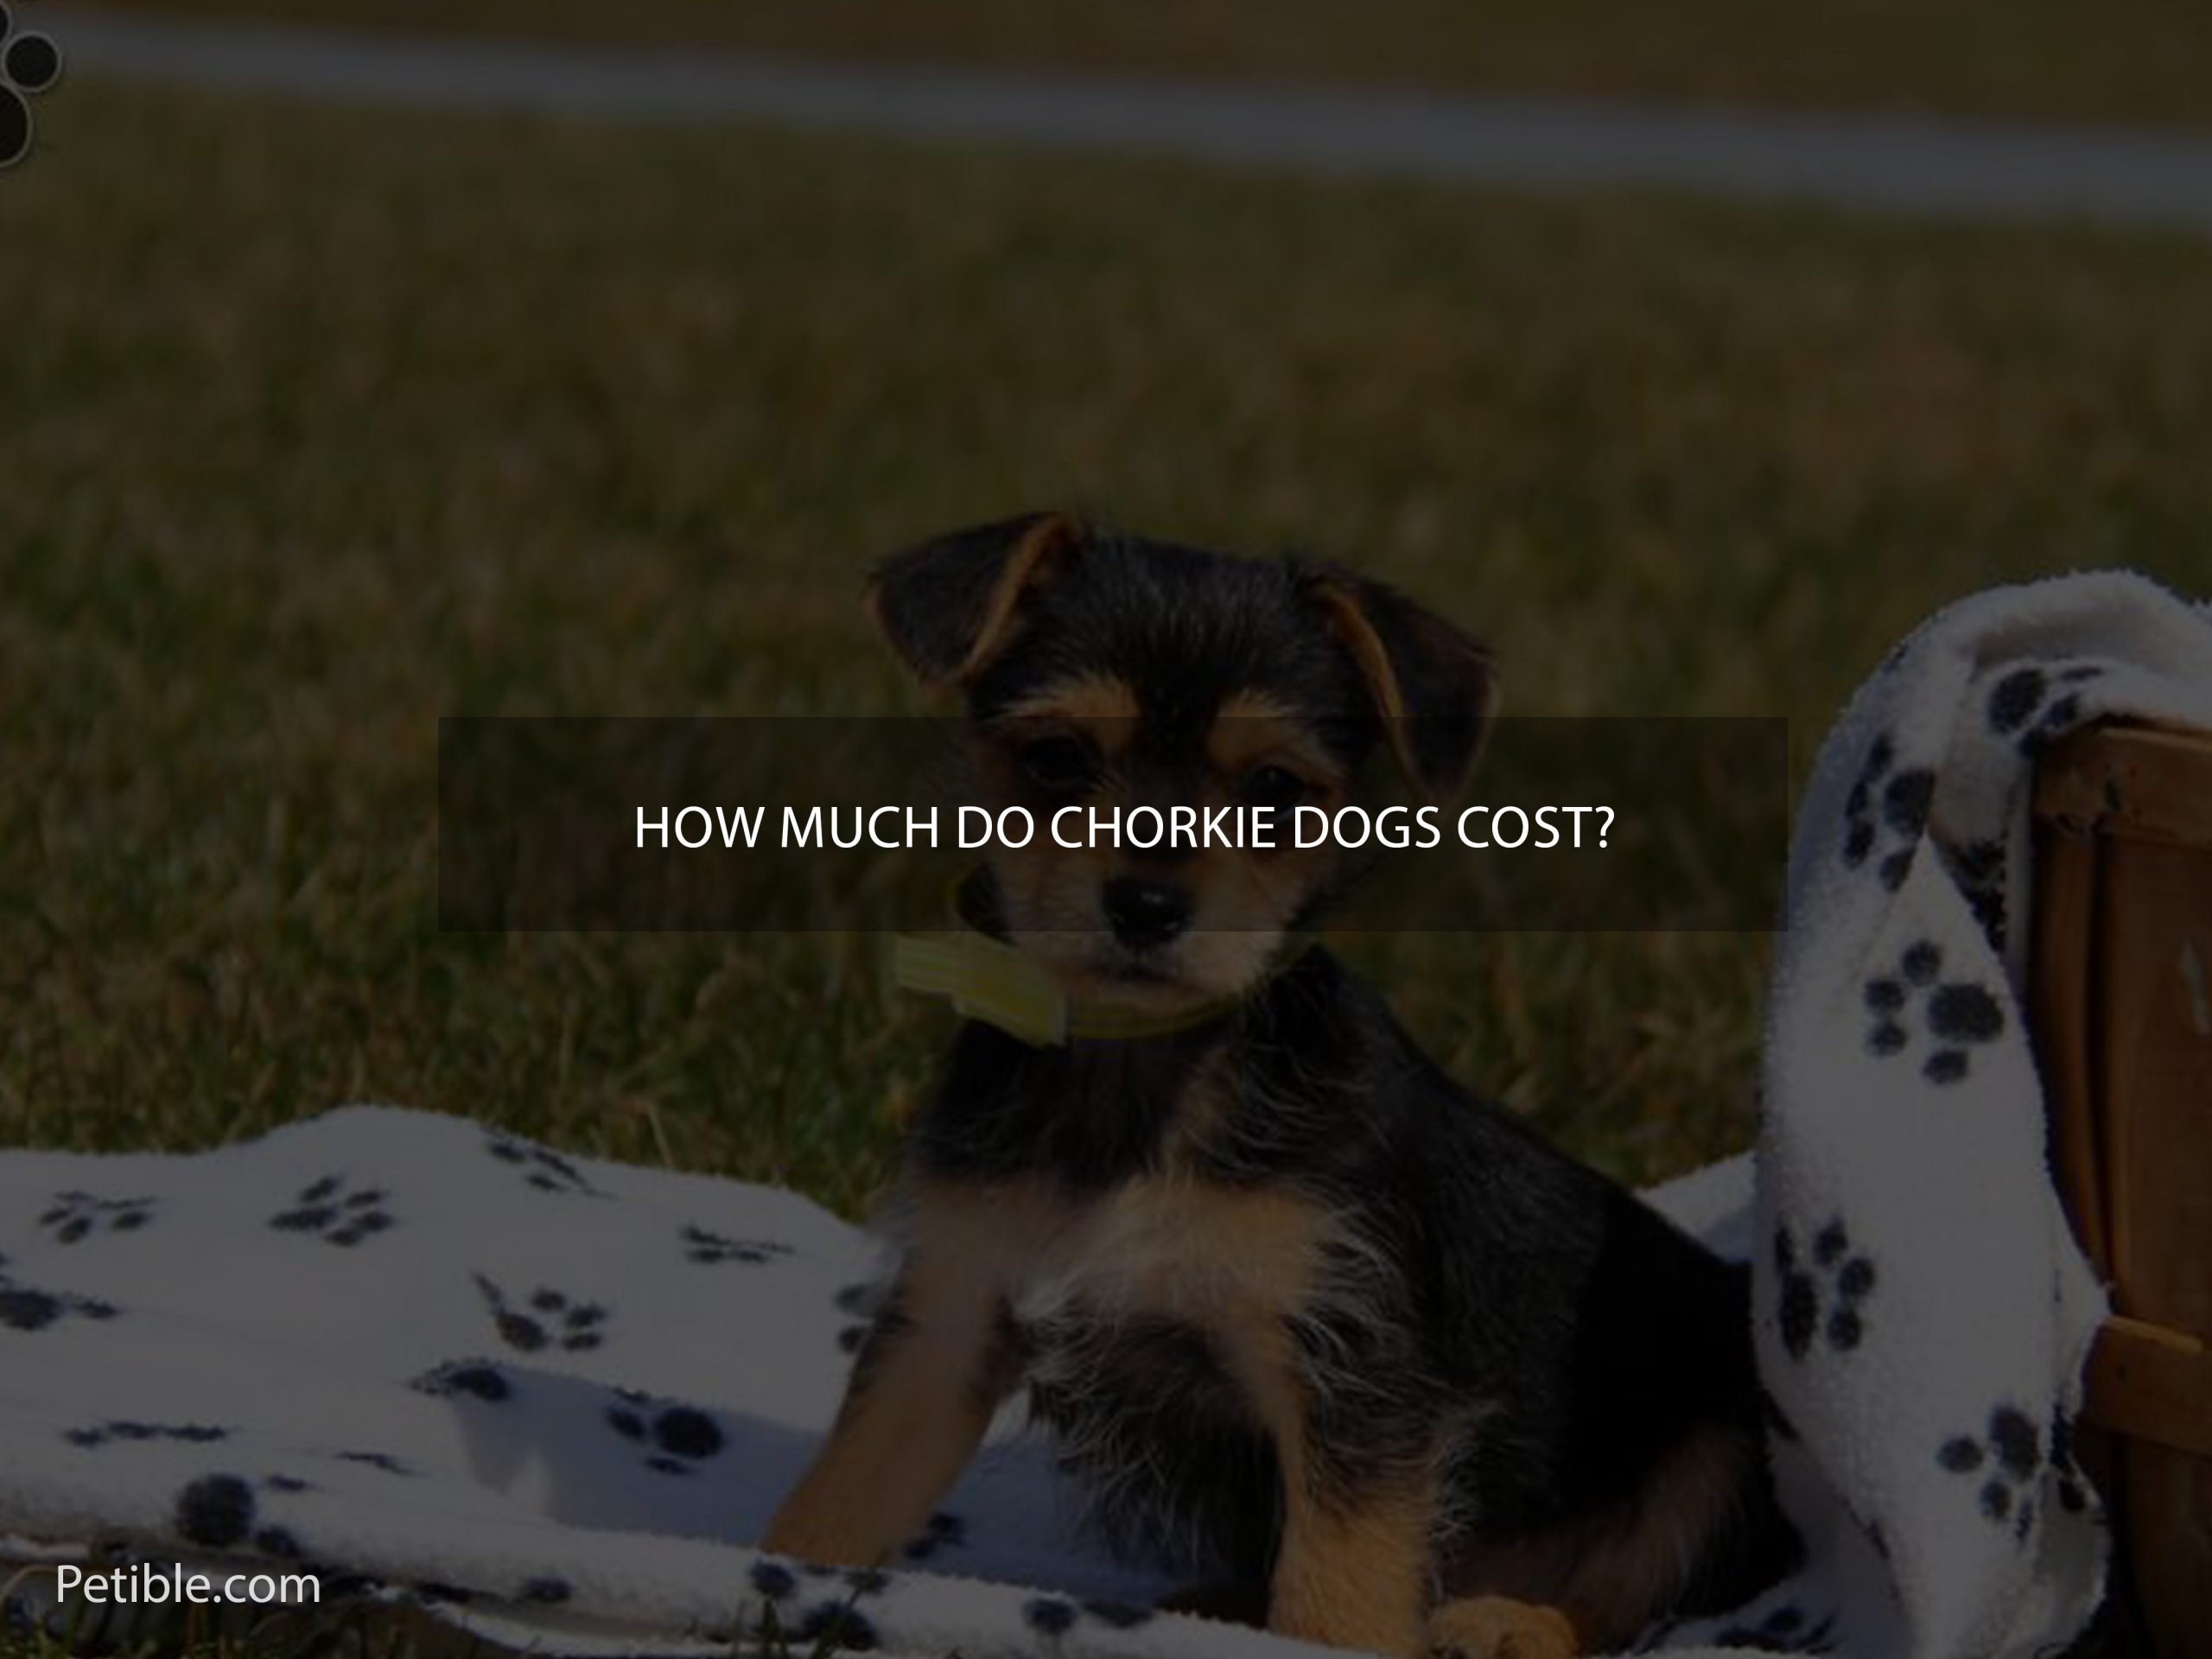 How much do Chorkie dogs cost